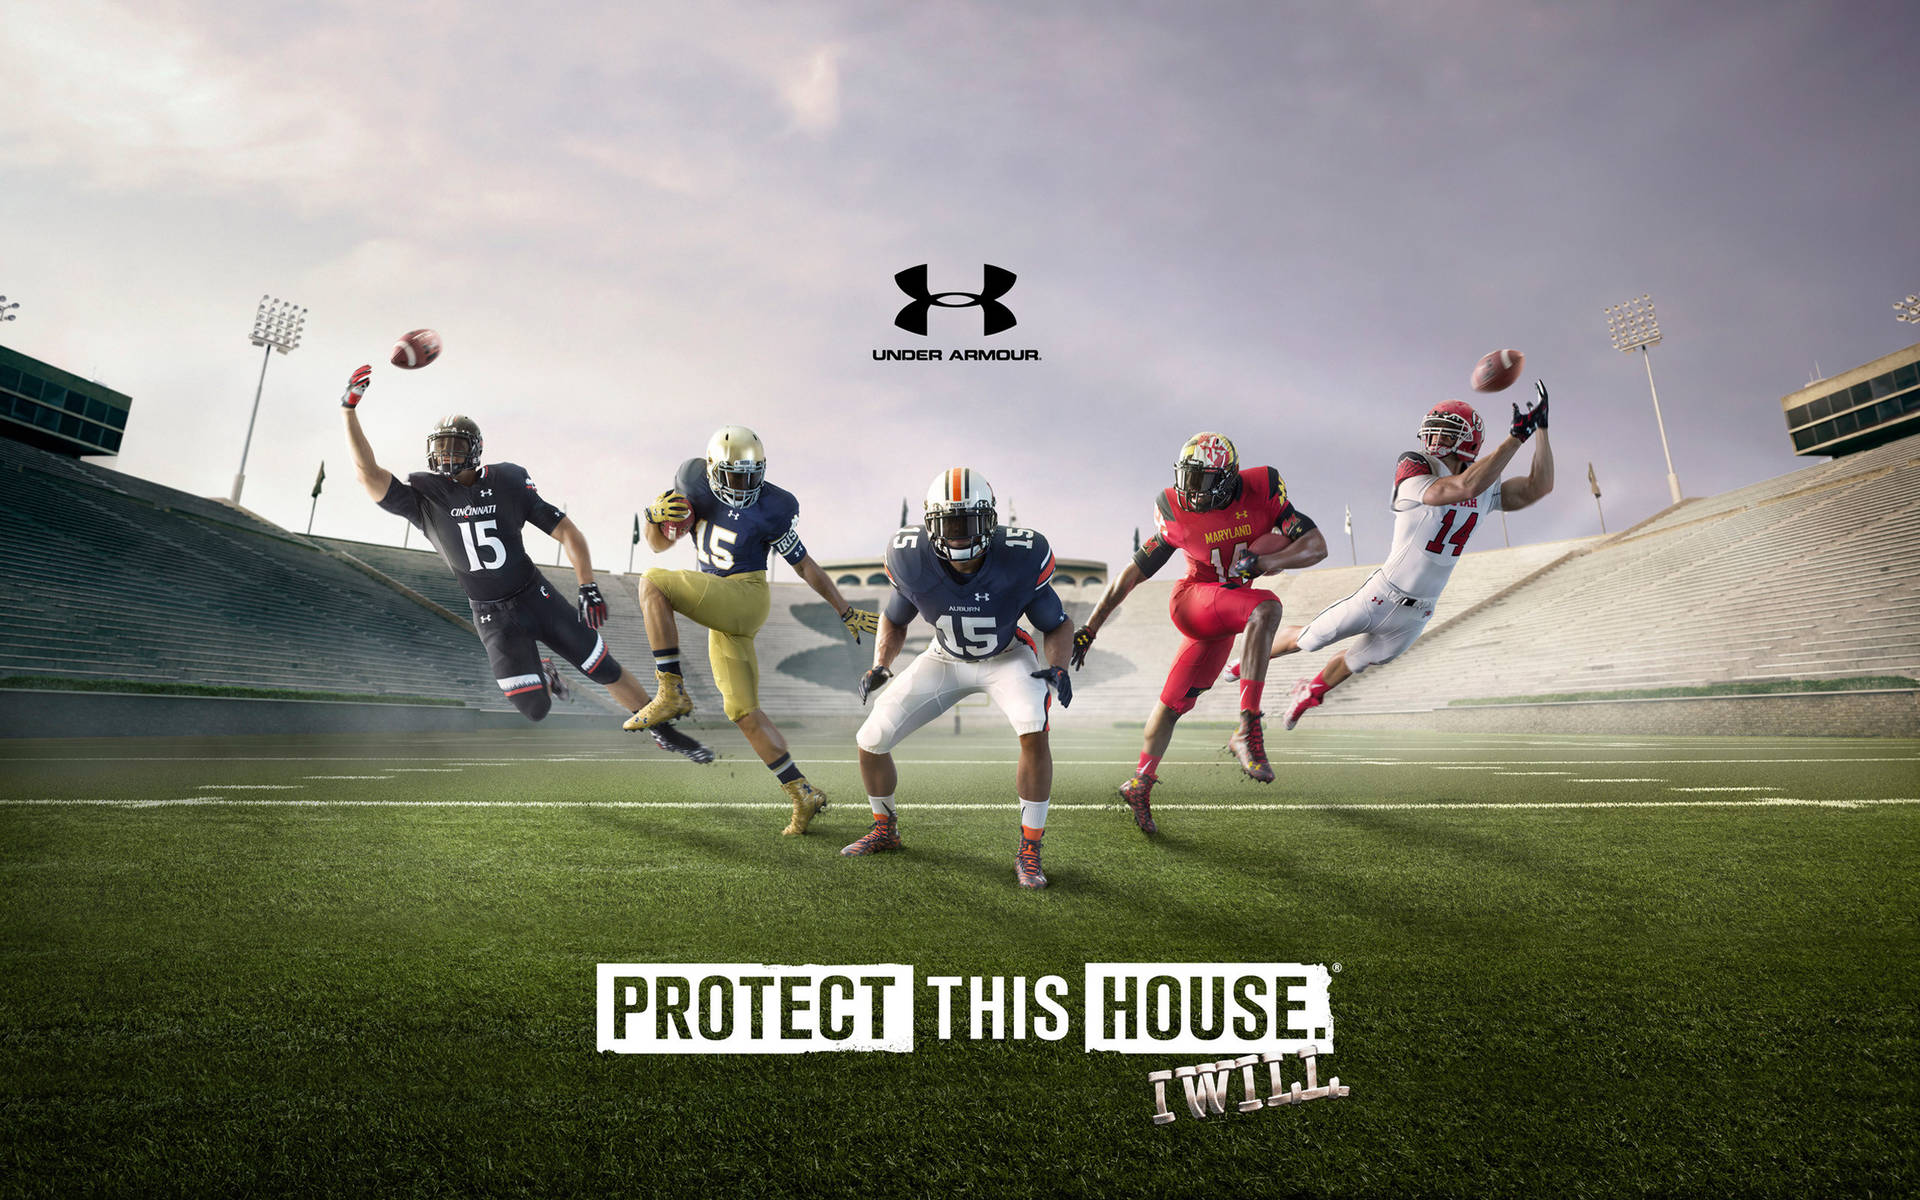 Under Armour Protect This House Wallpaper